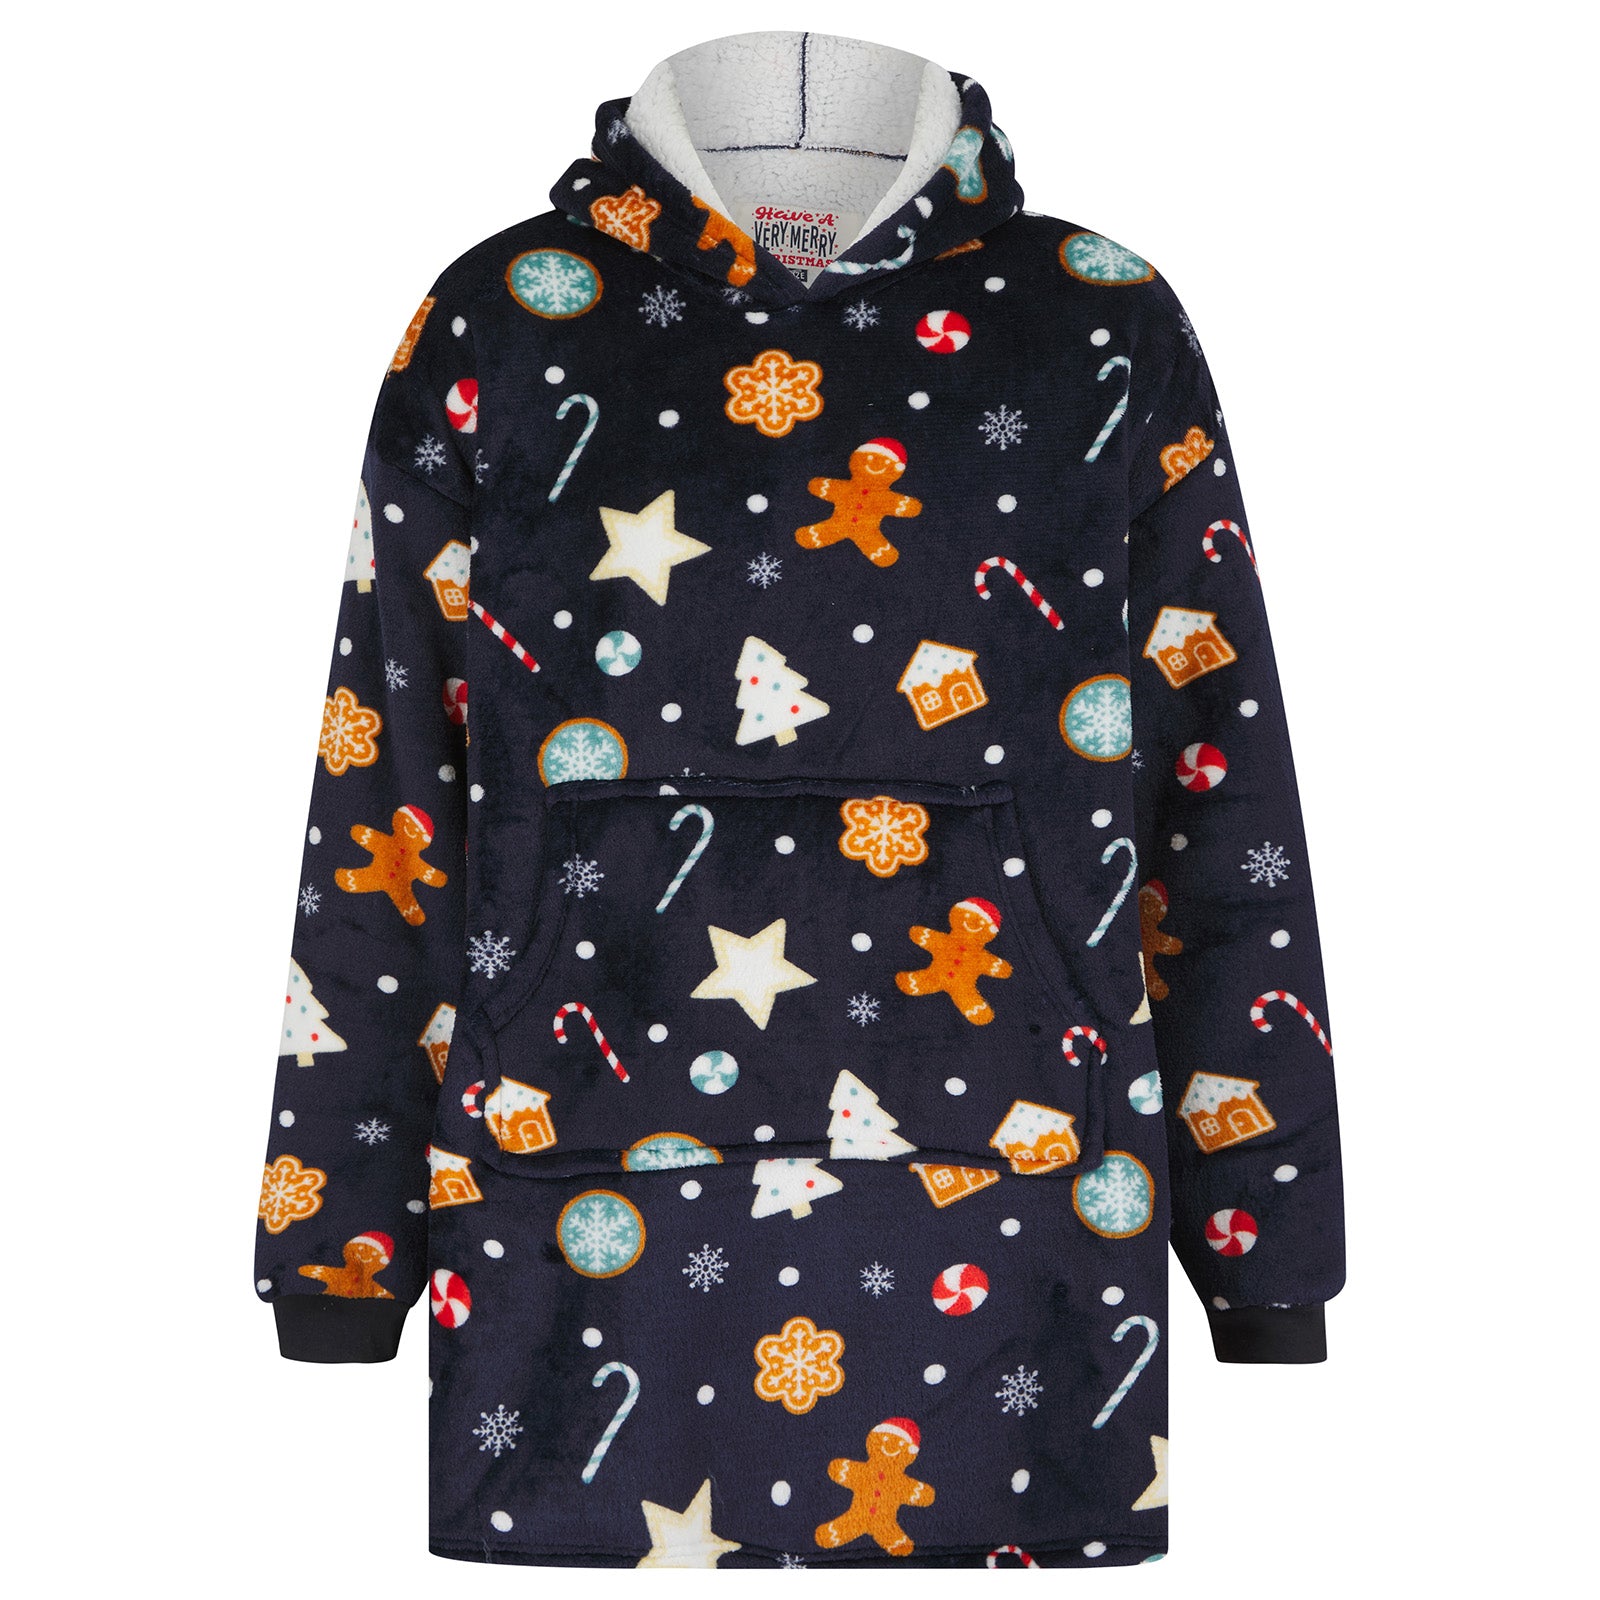 navy blue oversized hoodie with rgingerbread man, tree and star pattern with sherpa fleece lining